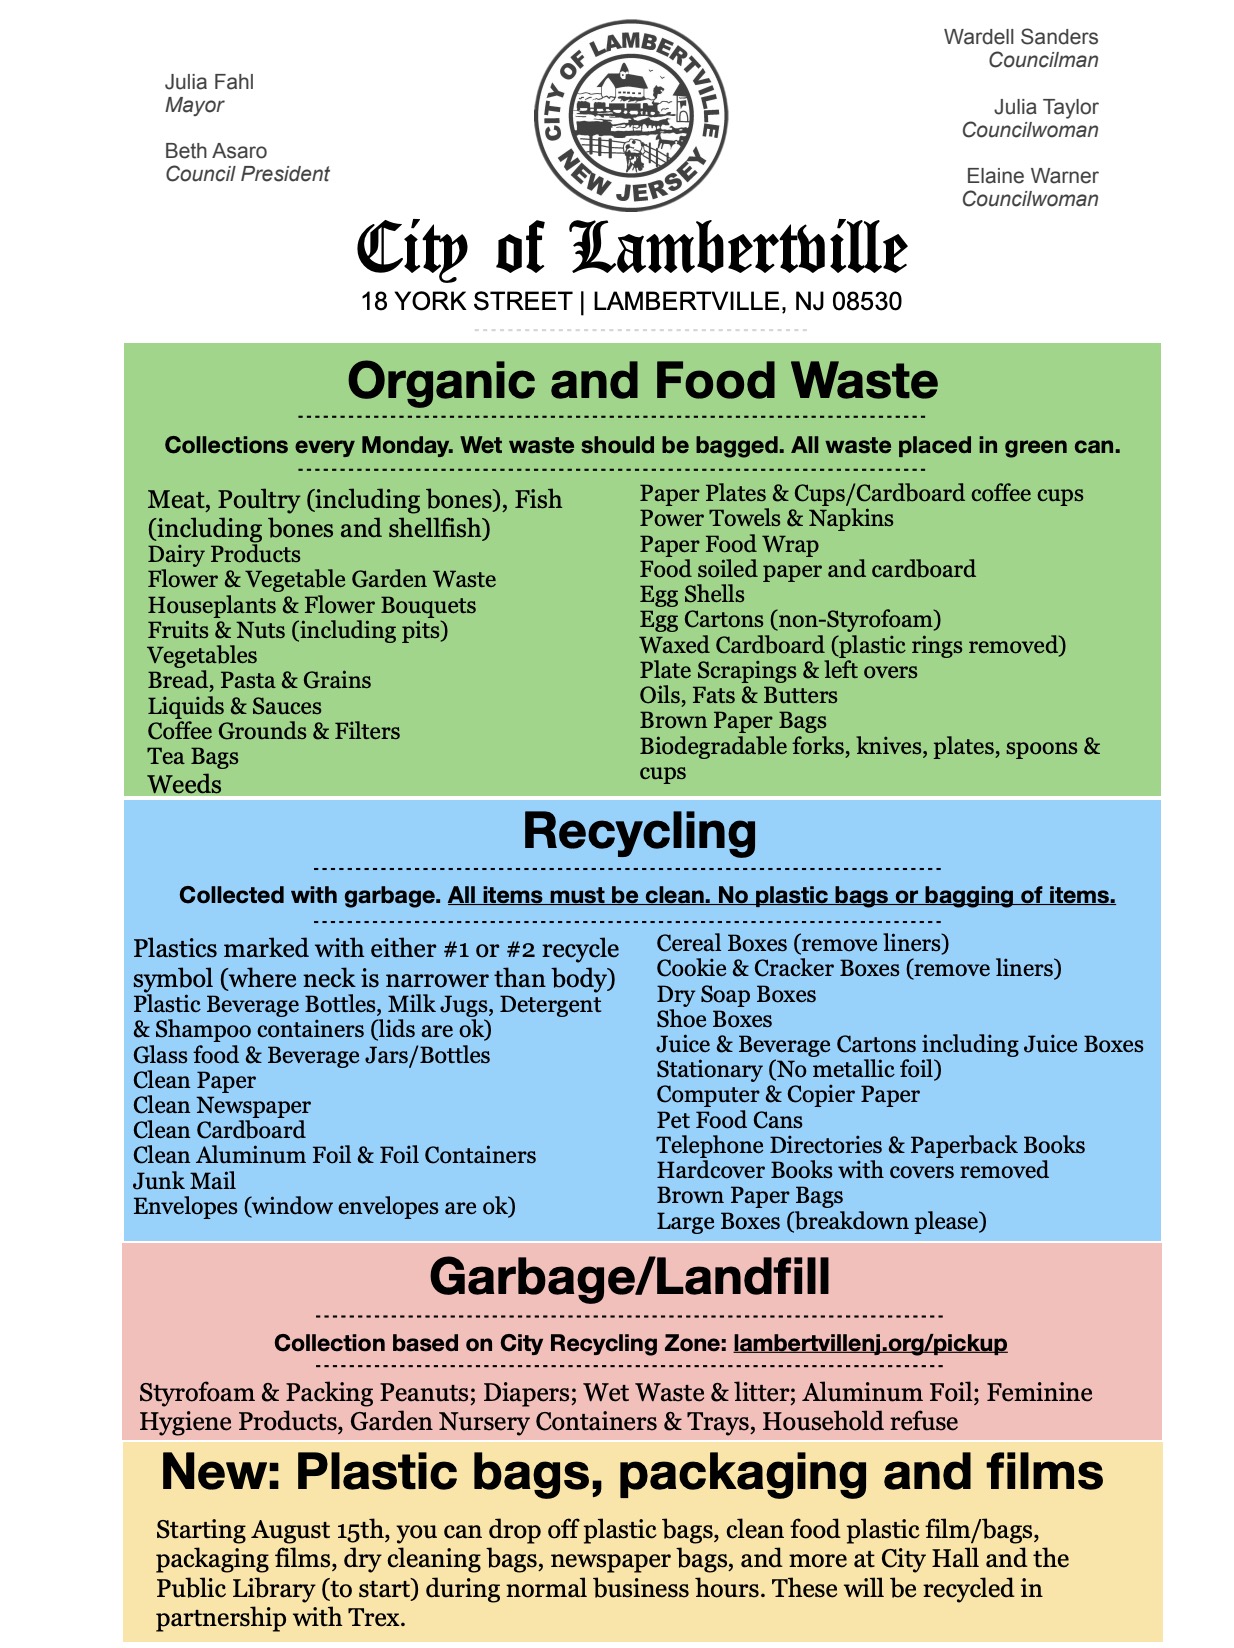 Recycling information - click for PDF